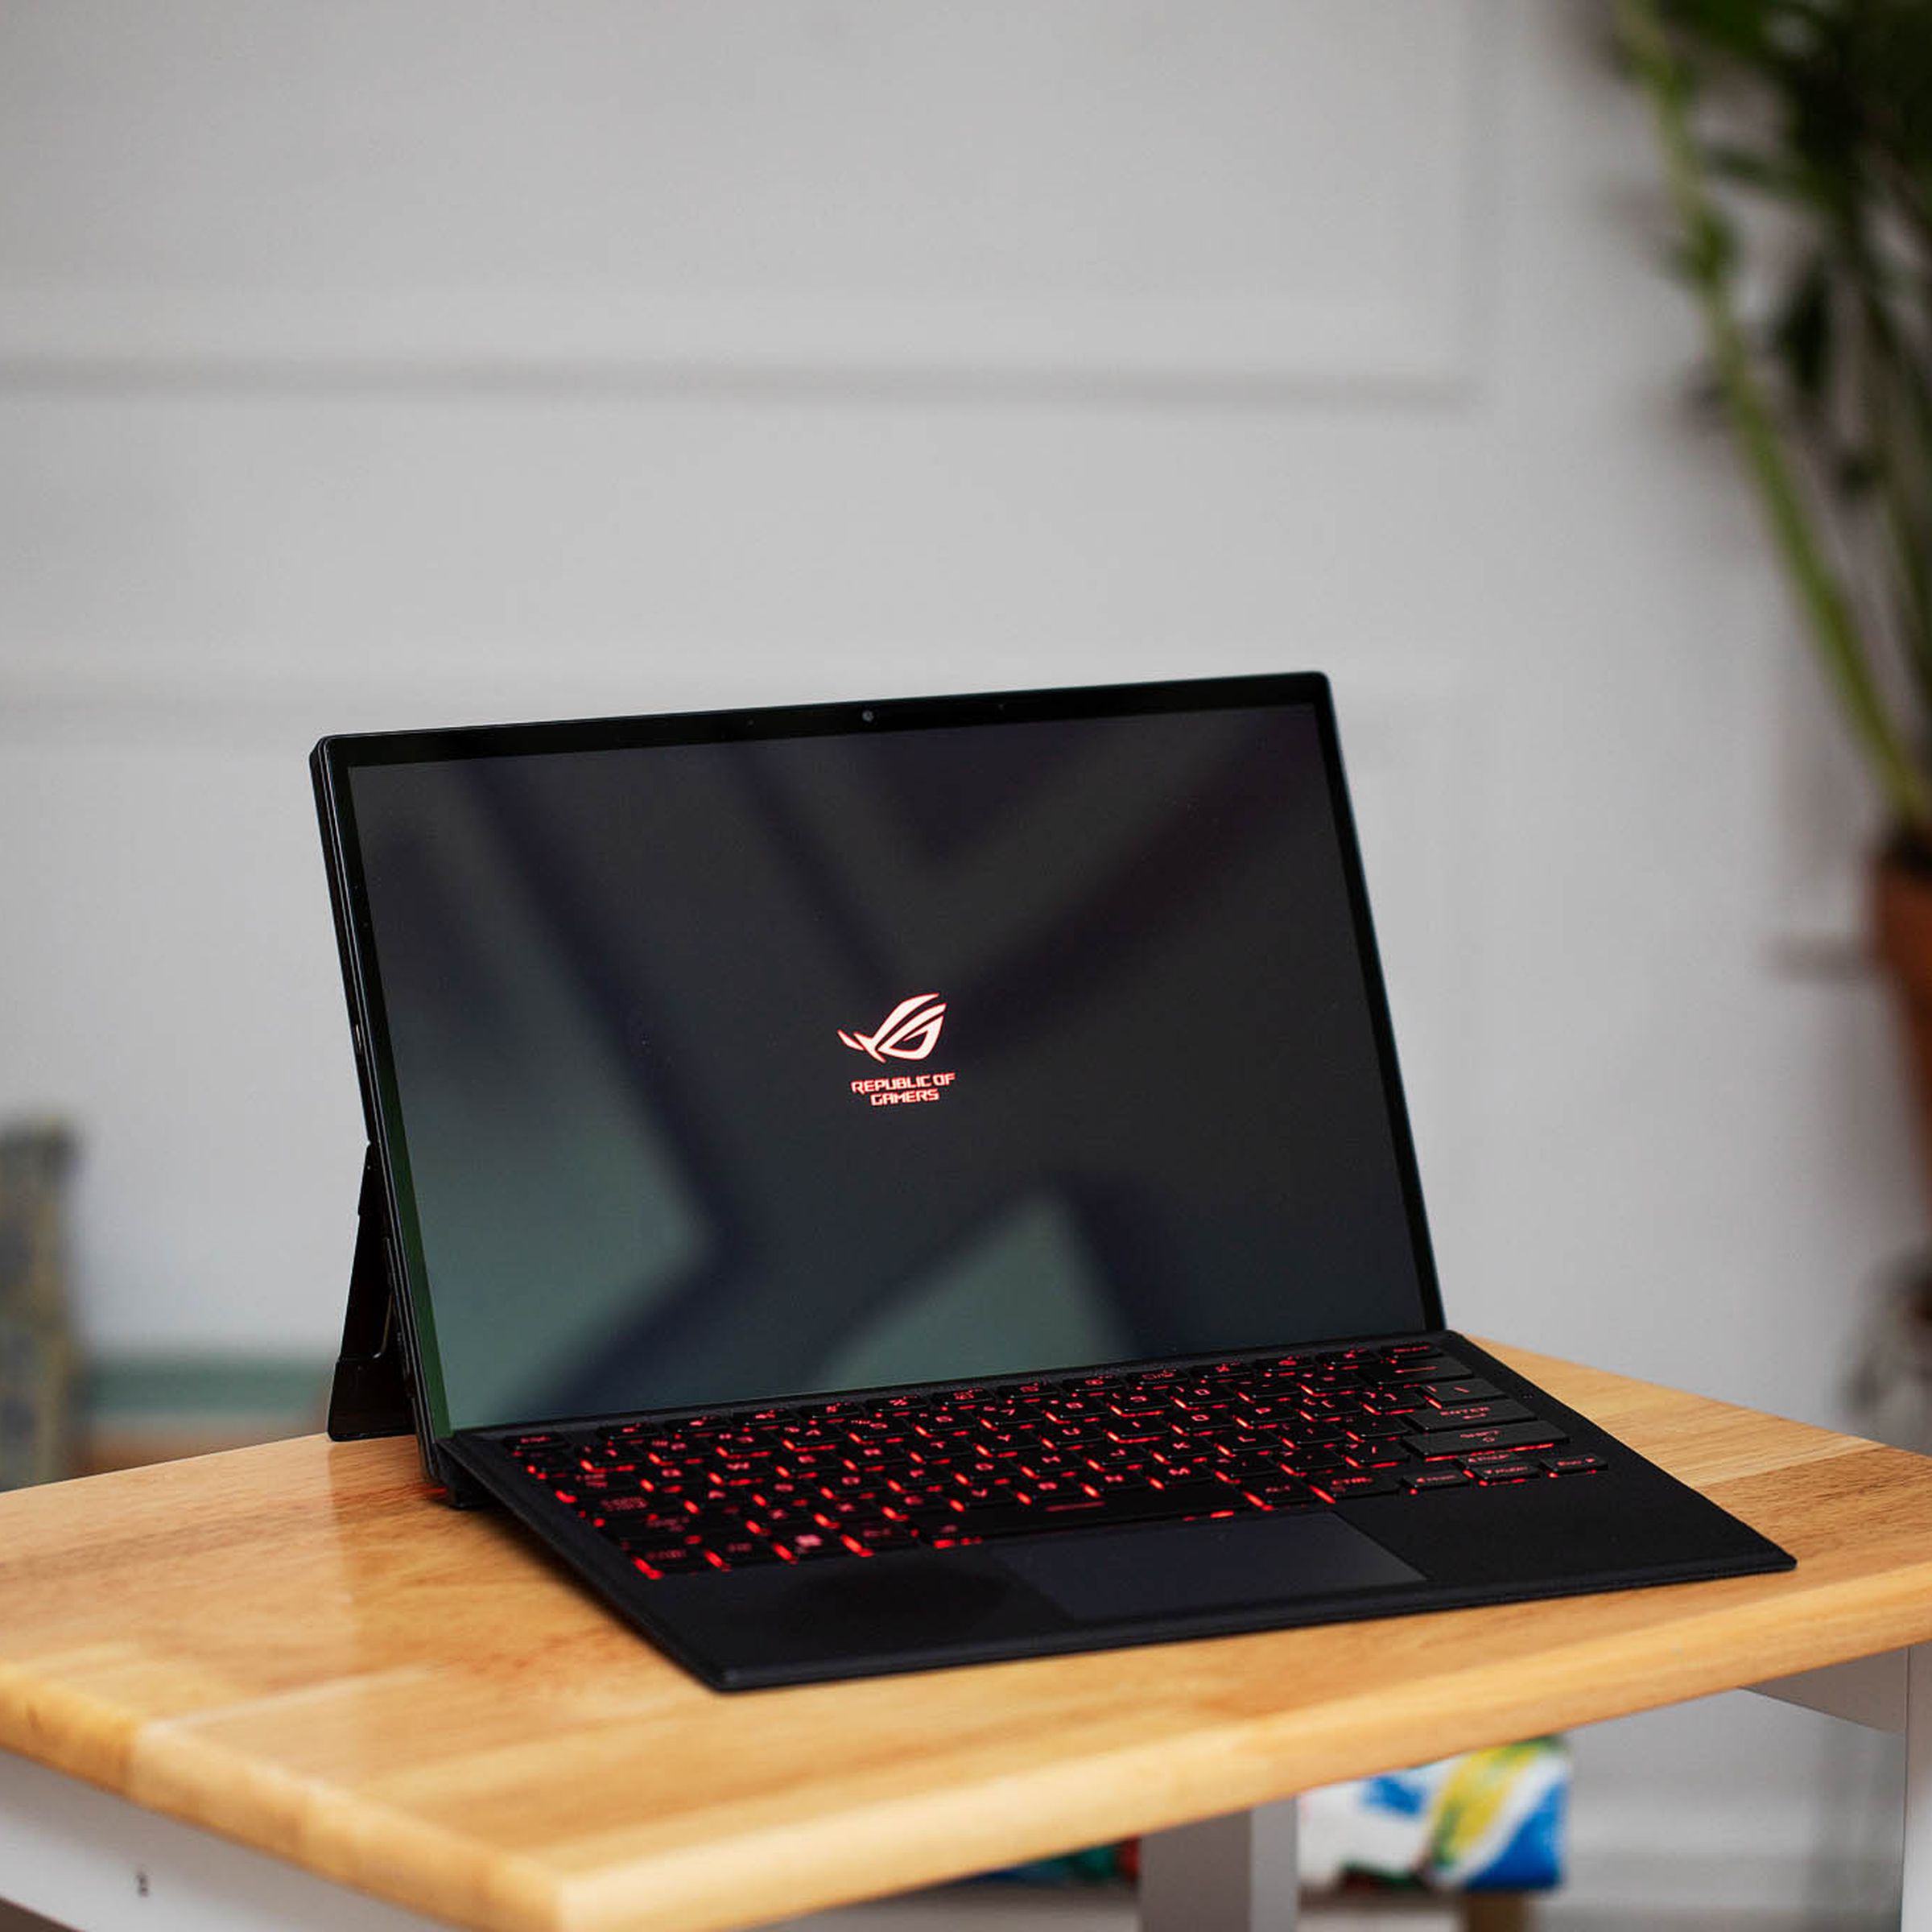 The Asus ROG Flow Z13 in laptop mode on a small table. The screen displays the ROG logo.